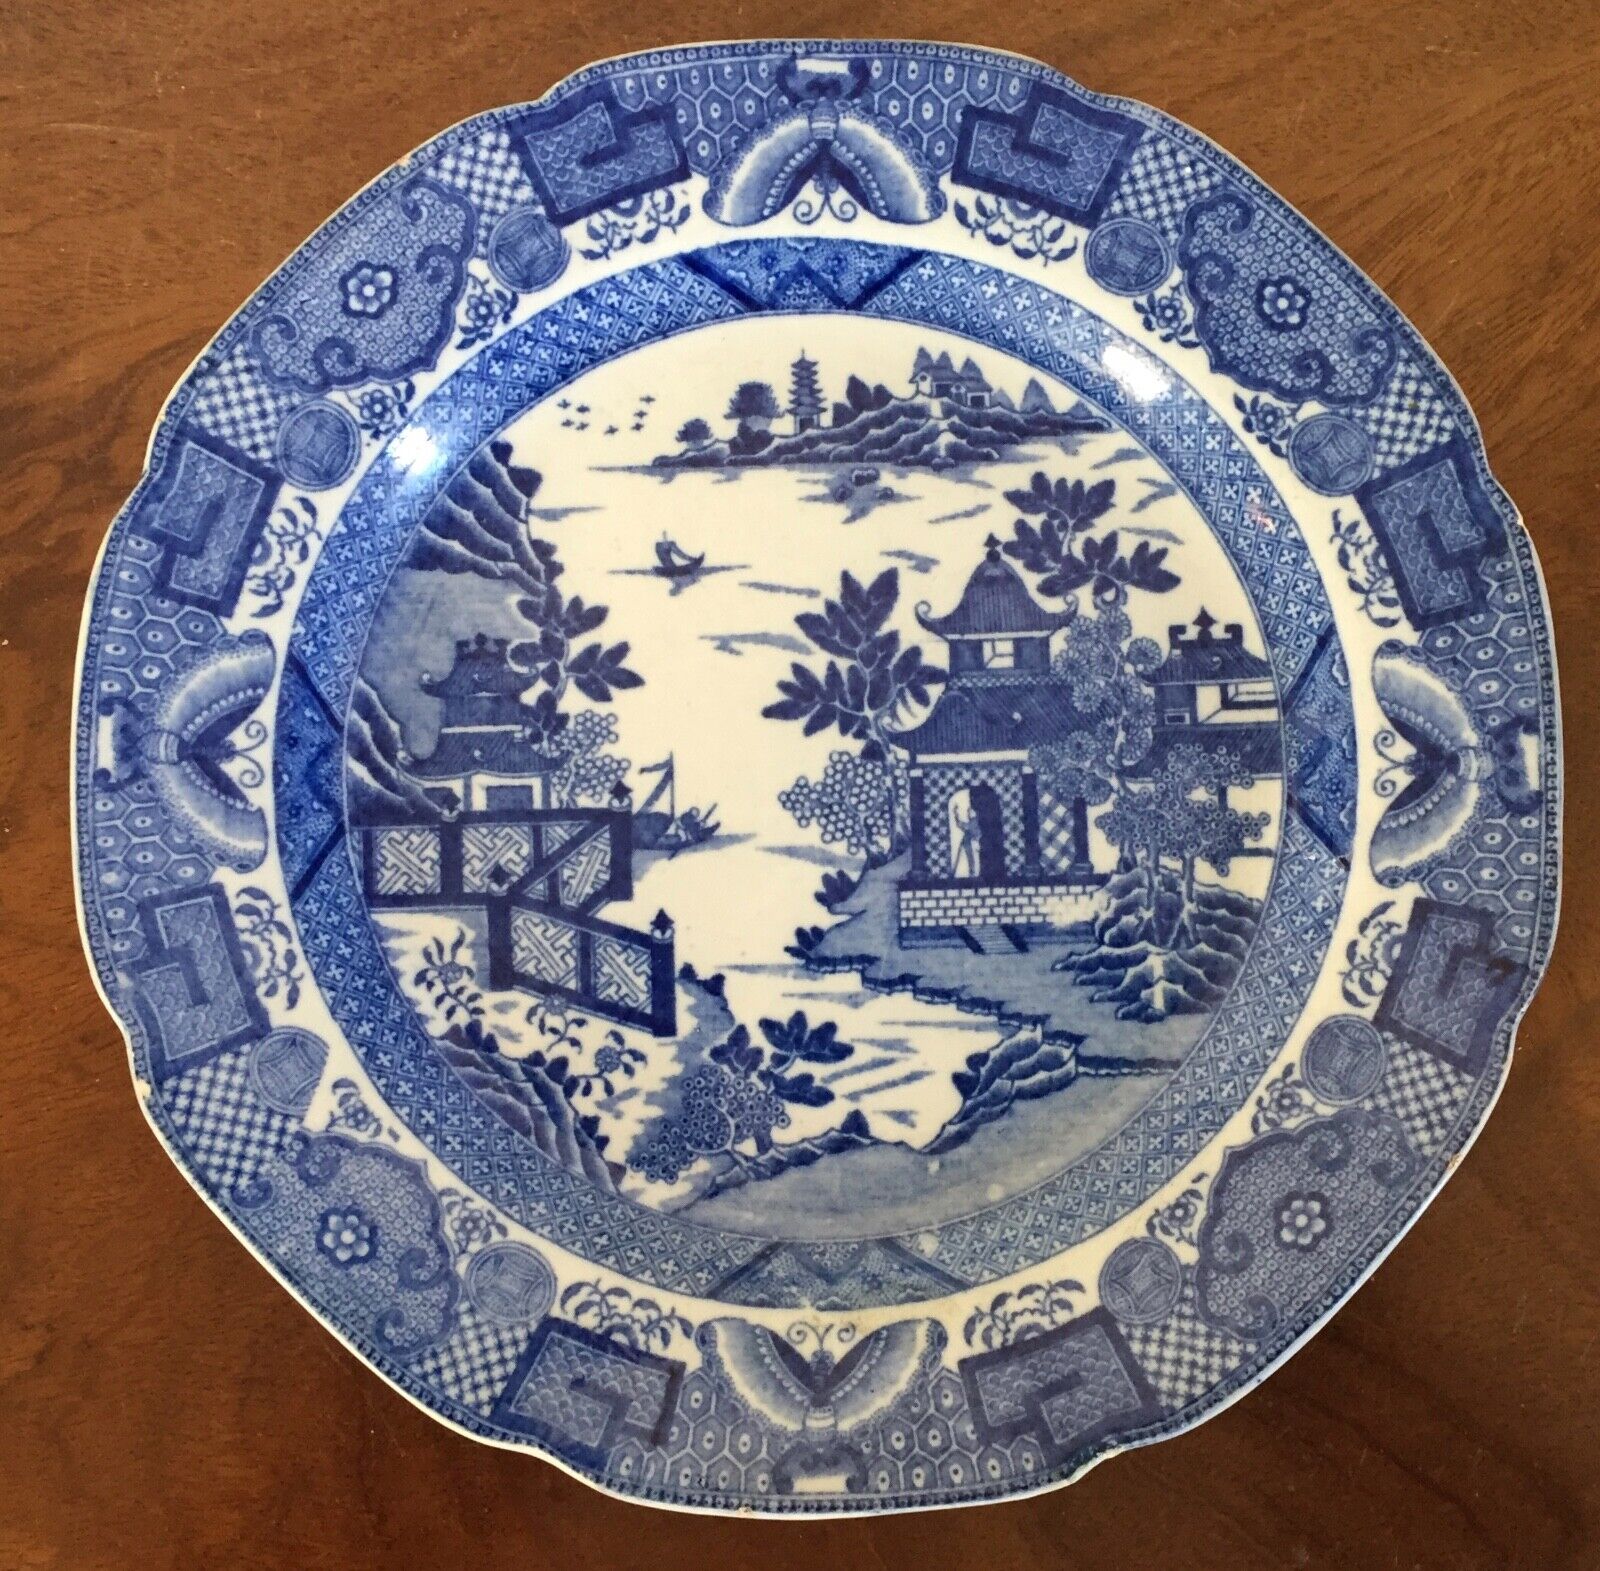 Antique English Staffordshire Pearlware Plate Chinese Blue Willow 18th 19th c.